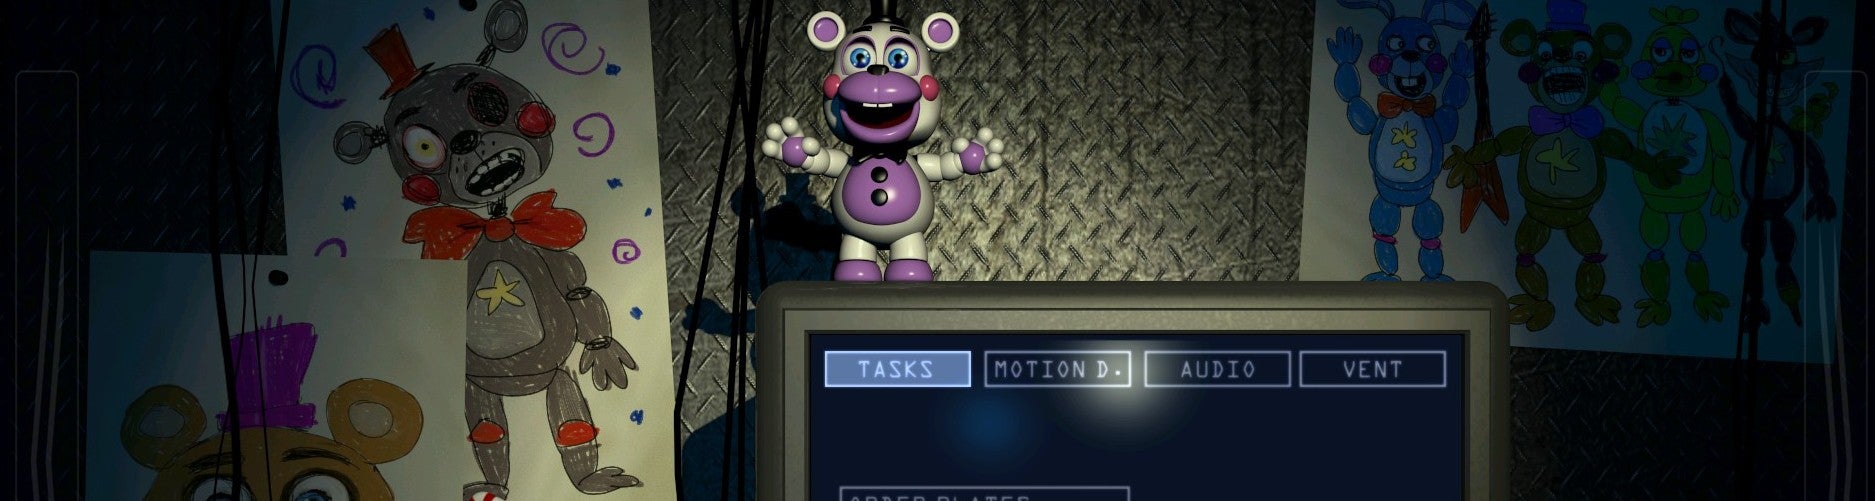 Image for Freddy Fazbear’s Pizzeria Simulator Guide - FNAF 6 Cheats for Infinite Money and Night Skip - Five Nights at Freddy’s 6 - How to Defend Against Animatronics and get the Good Ending